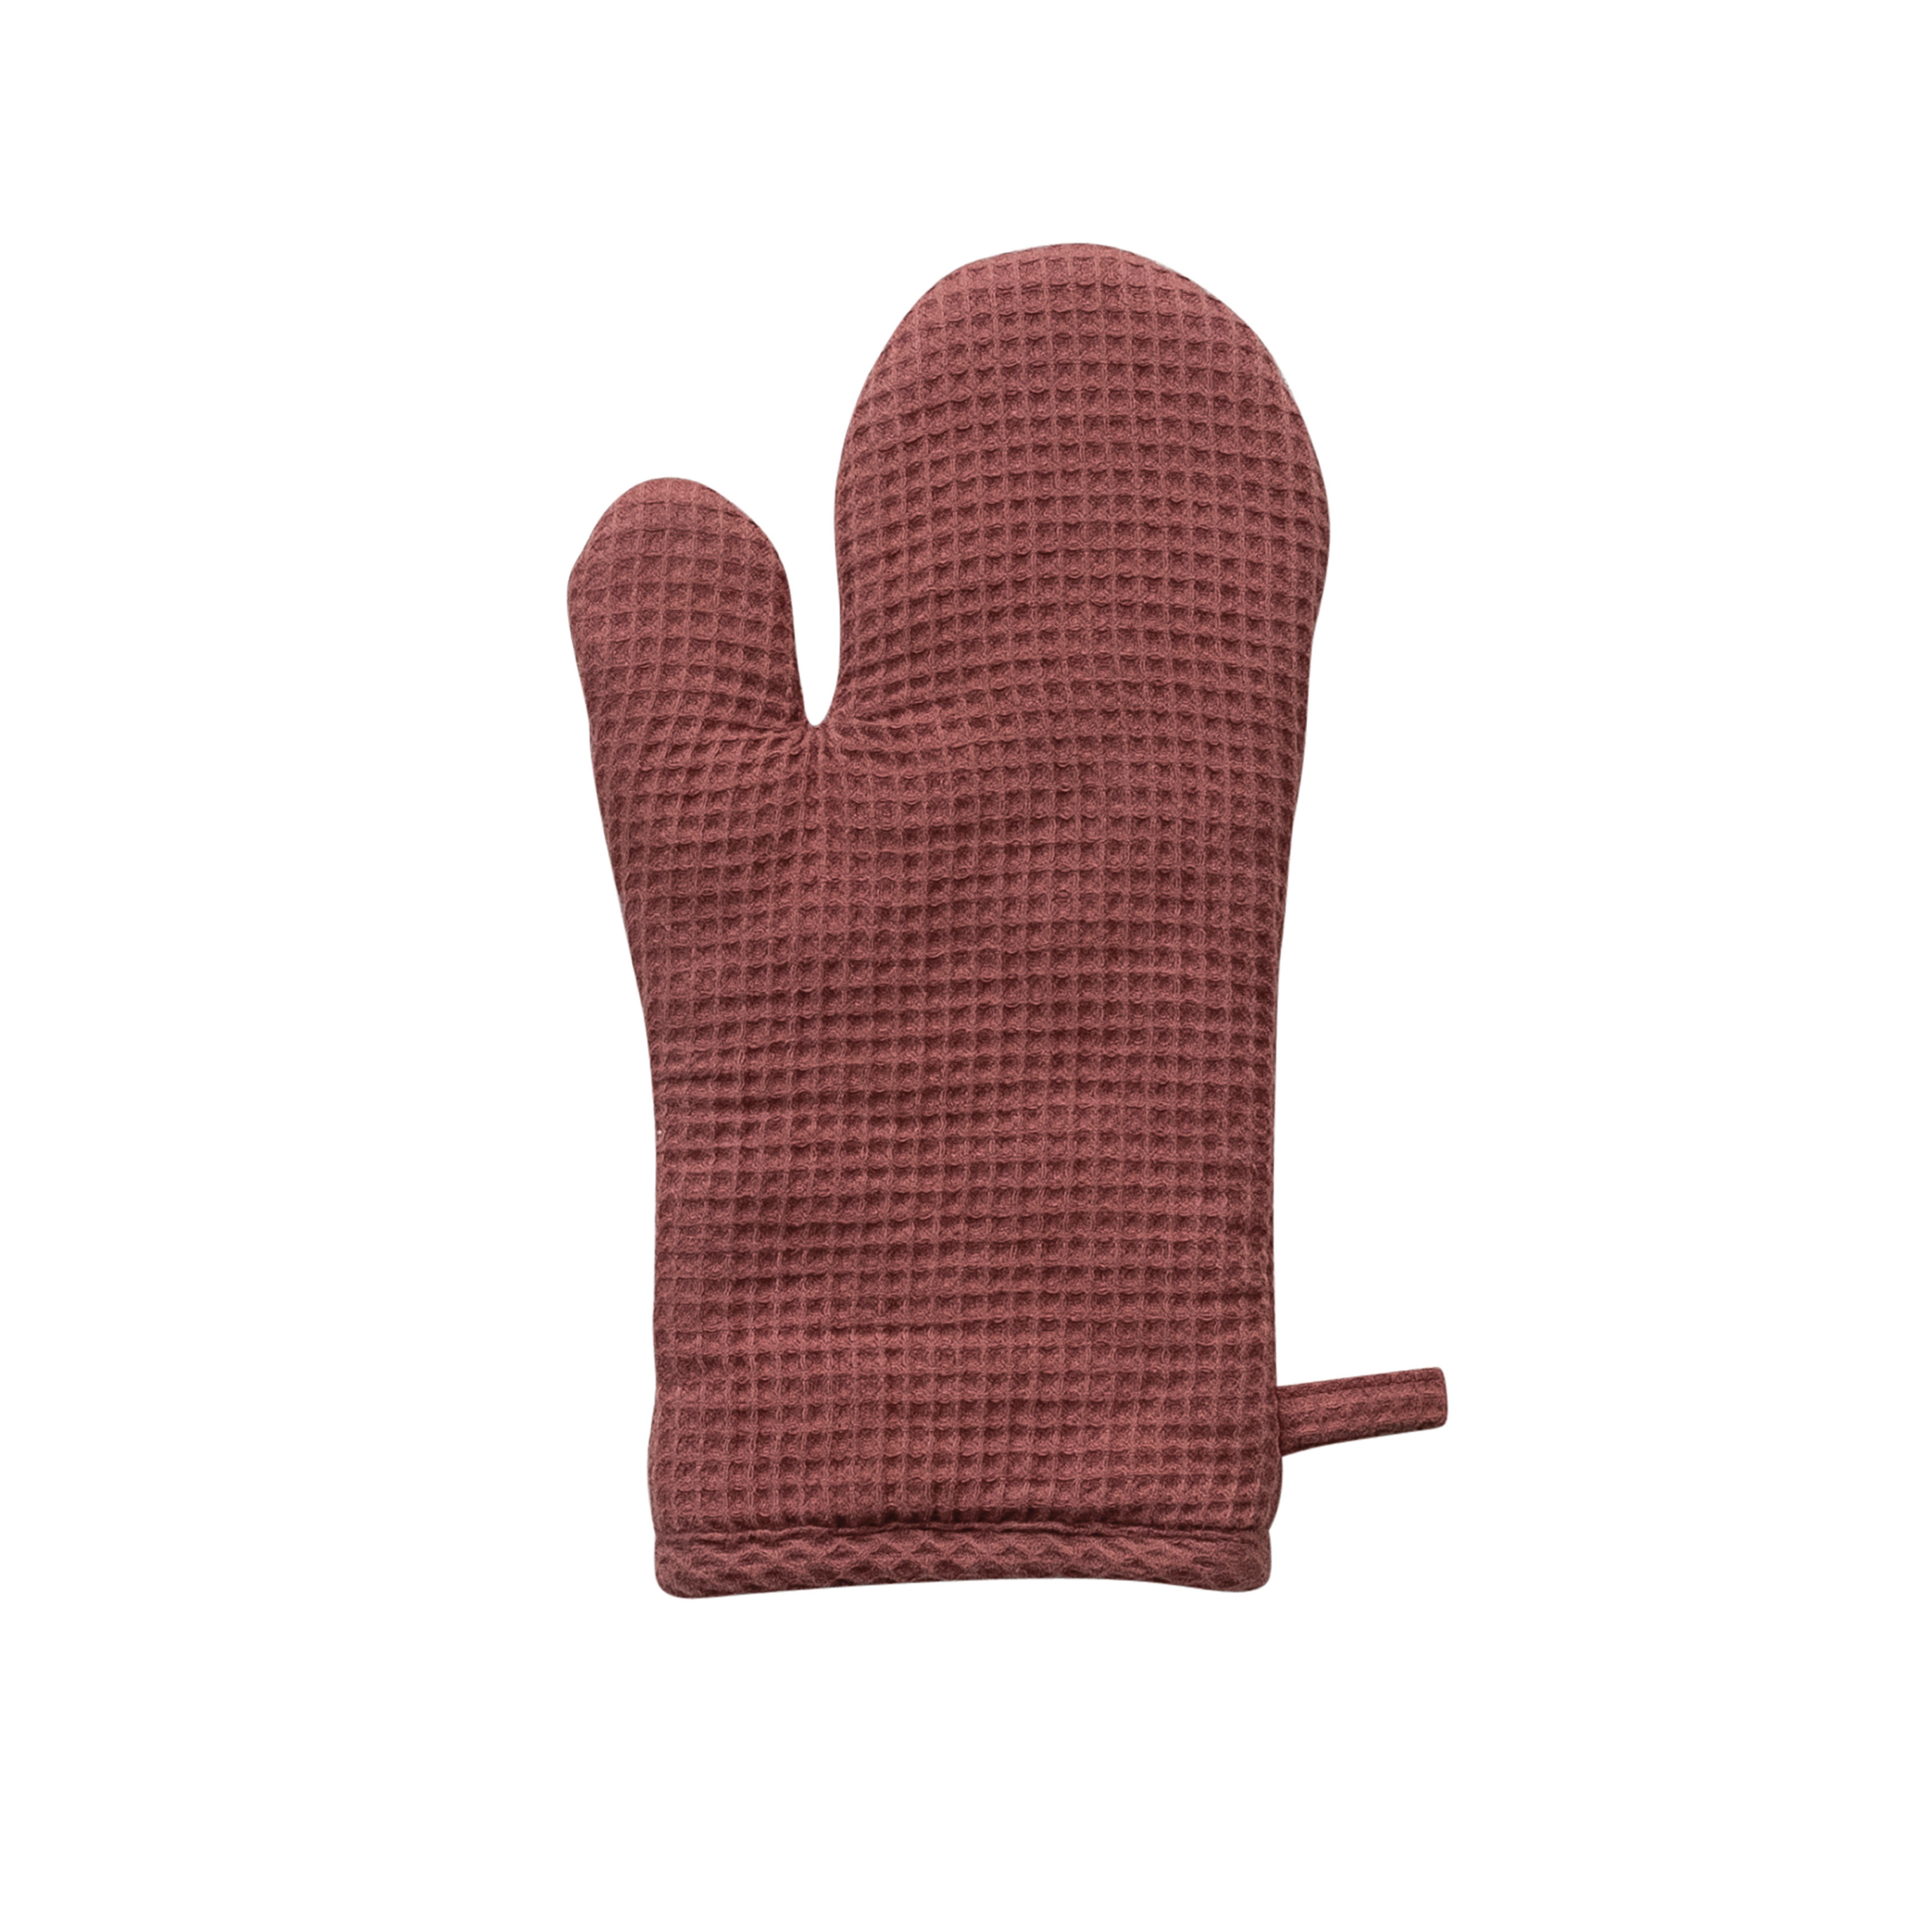 Woven Linen and Cotton Waffle Hot Pad Mitt, Berry Color - Image 0